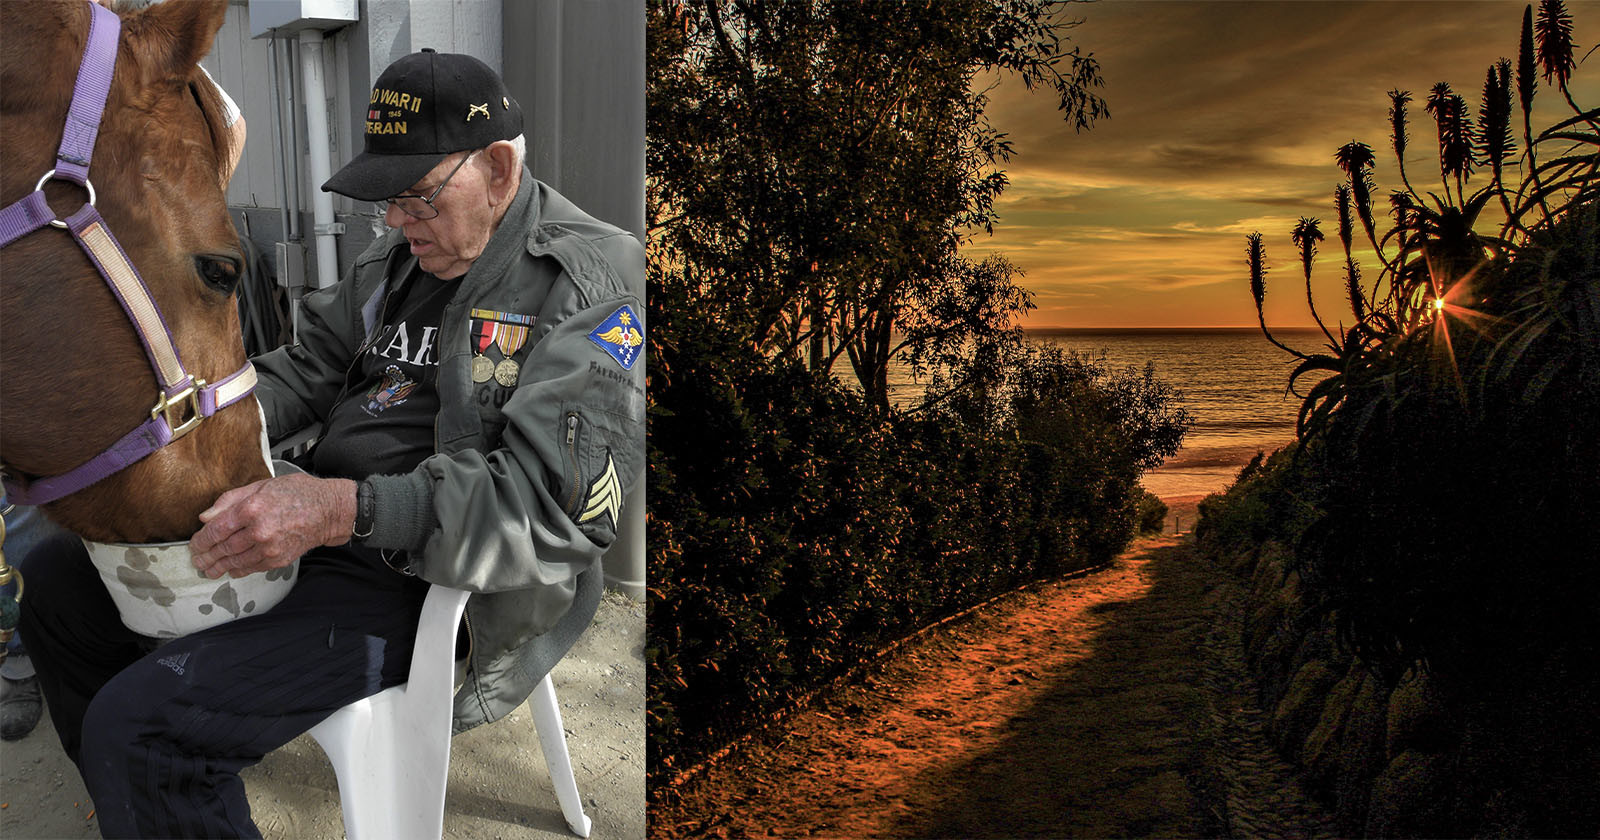 Veterans Teach Photography to Fellow Service Members to Foster Social Bonds